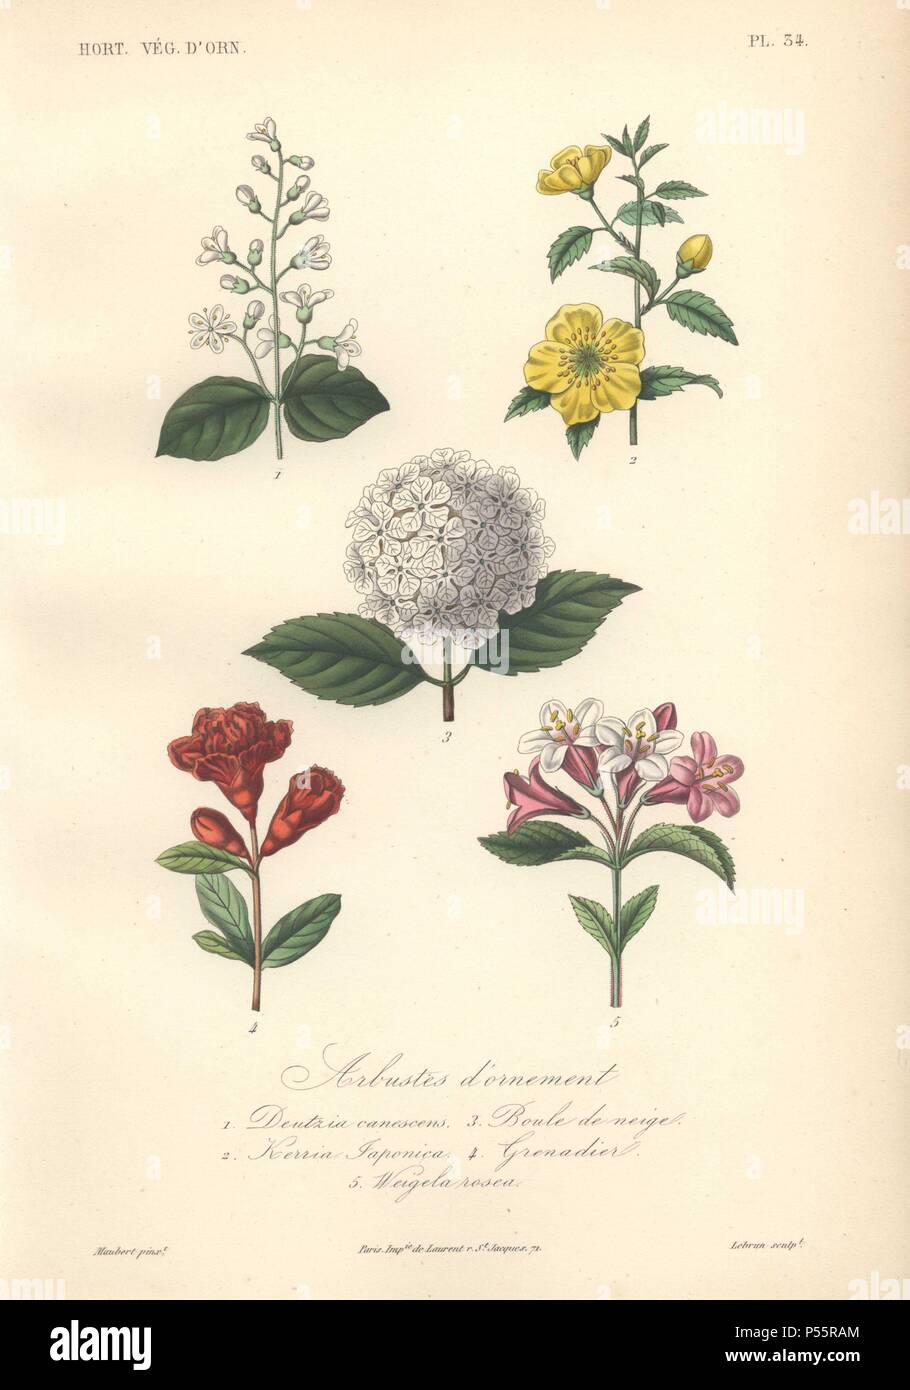 Ornamental shrubs, including a white abuliton (boule de neige, or snowball), yellow globeflower (Kerria japonica), white Deutzia, scarlet gloxinia, and pink and white weigela.. . Arbustes d'ornement, 1) Deutzia Canescens 2) Kerria Japonica 3) Boule De Neige 4) Grenadier 5) Weigela Rosea . . Handcolored lithograph by Edouard Maubert for Herincq's 'Le Regne Vegetal' (1865). Stock Photo